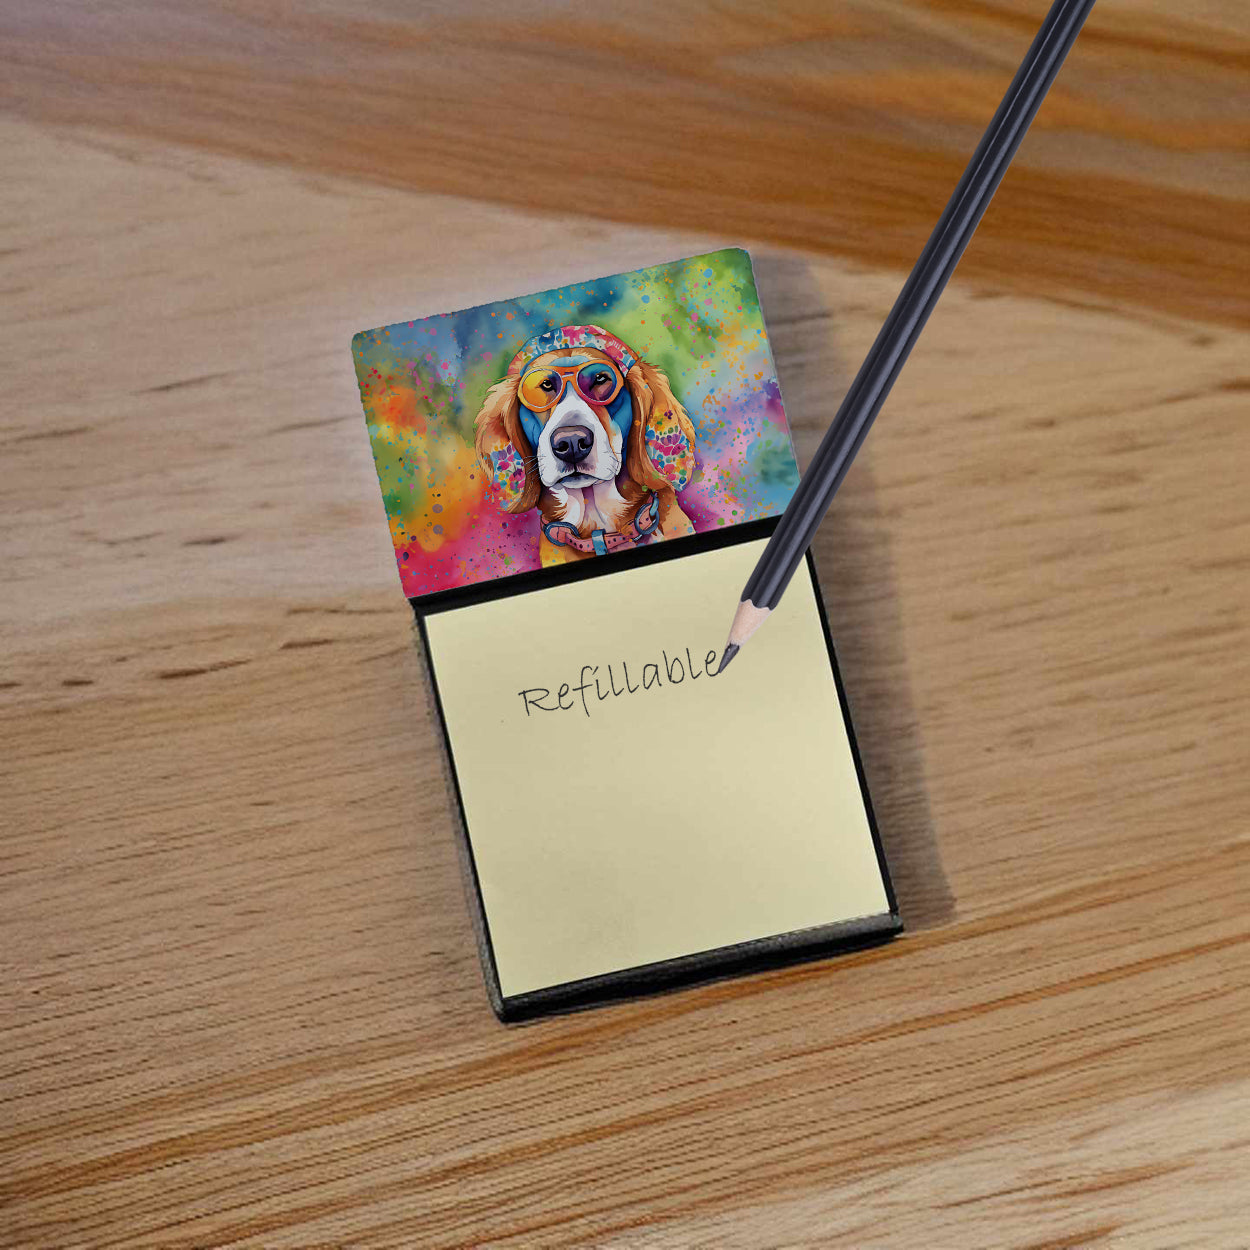 Buy this Hippie Dawg Sticky Note Holder